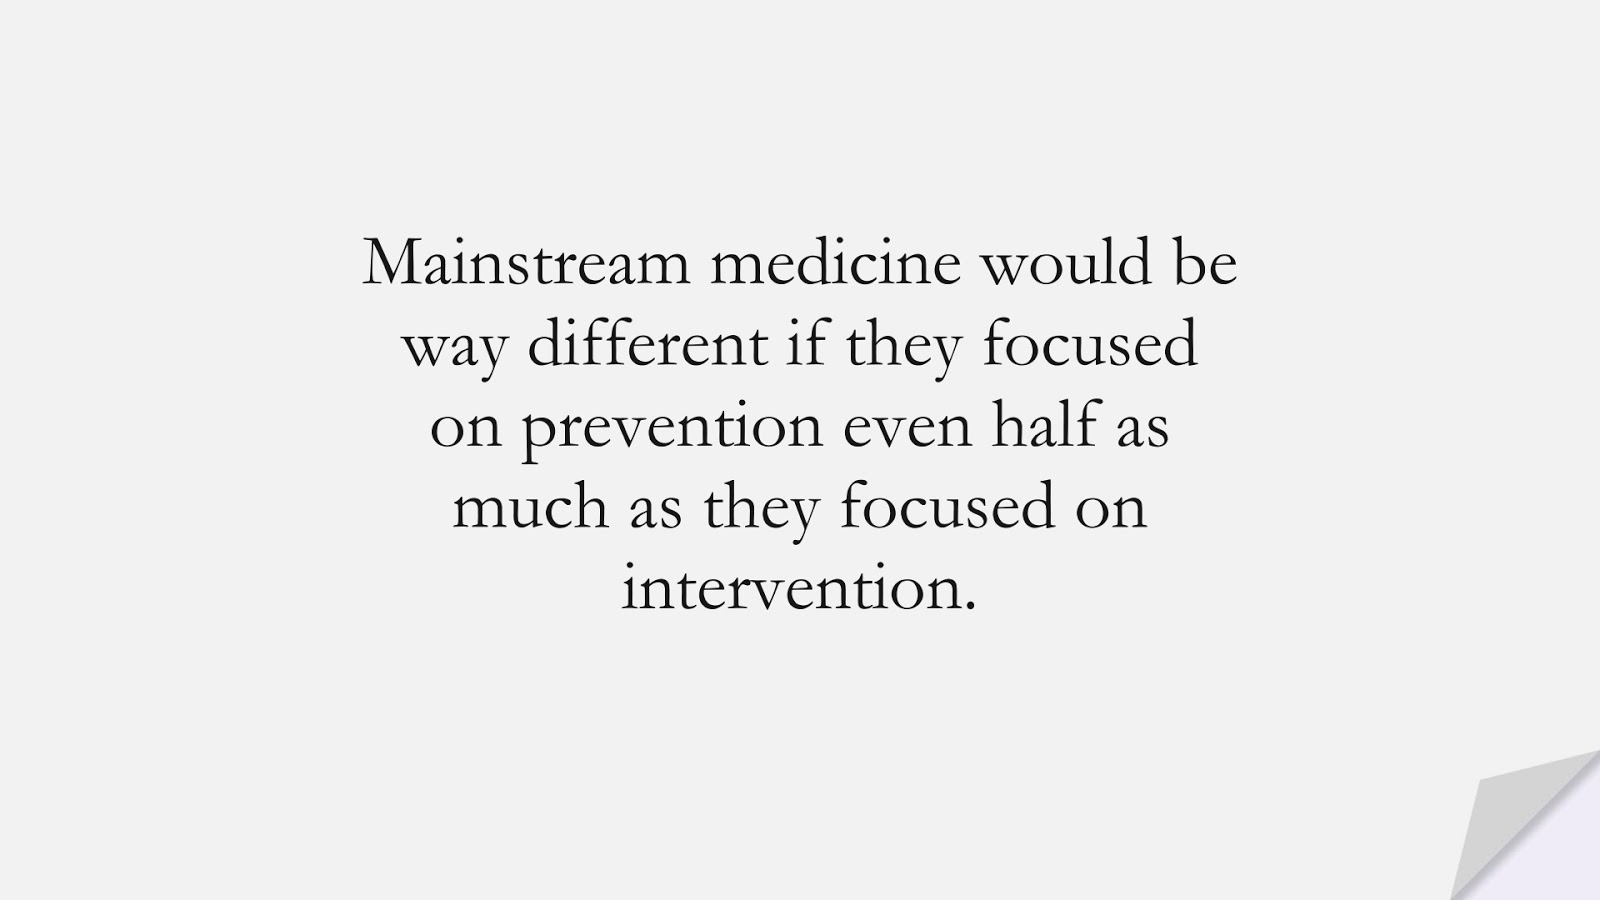 Mainstream medicine would be way different if they focused on prevention even half as much as they focused on intervention.FALSE